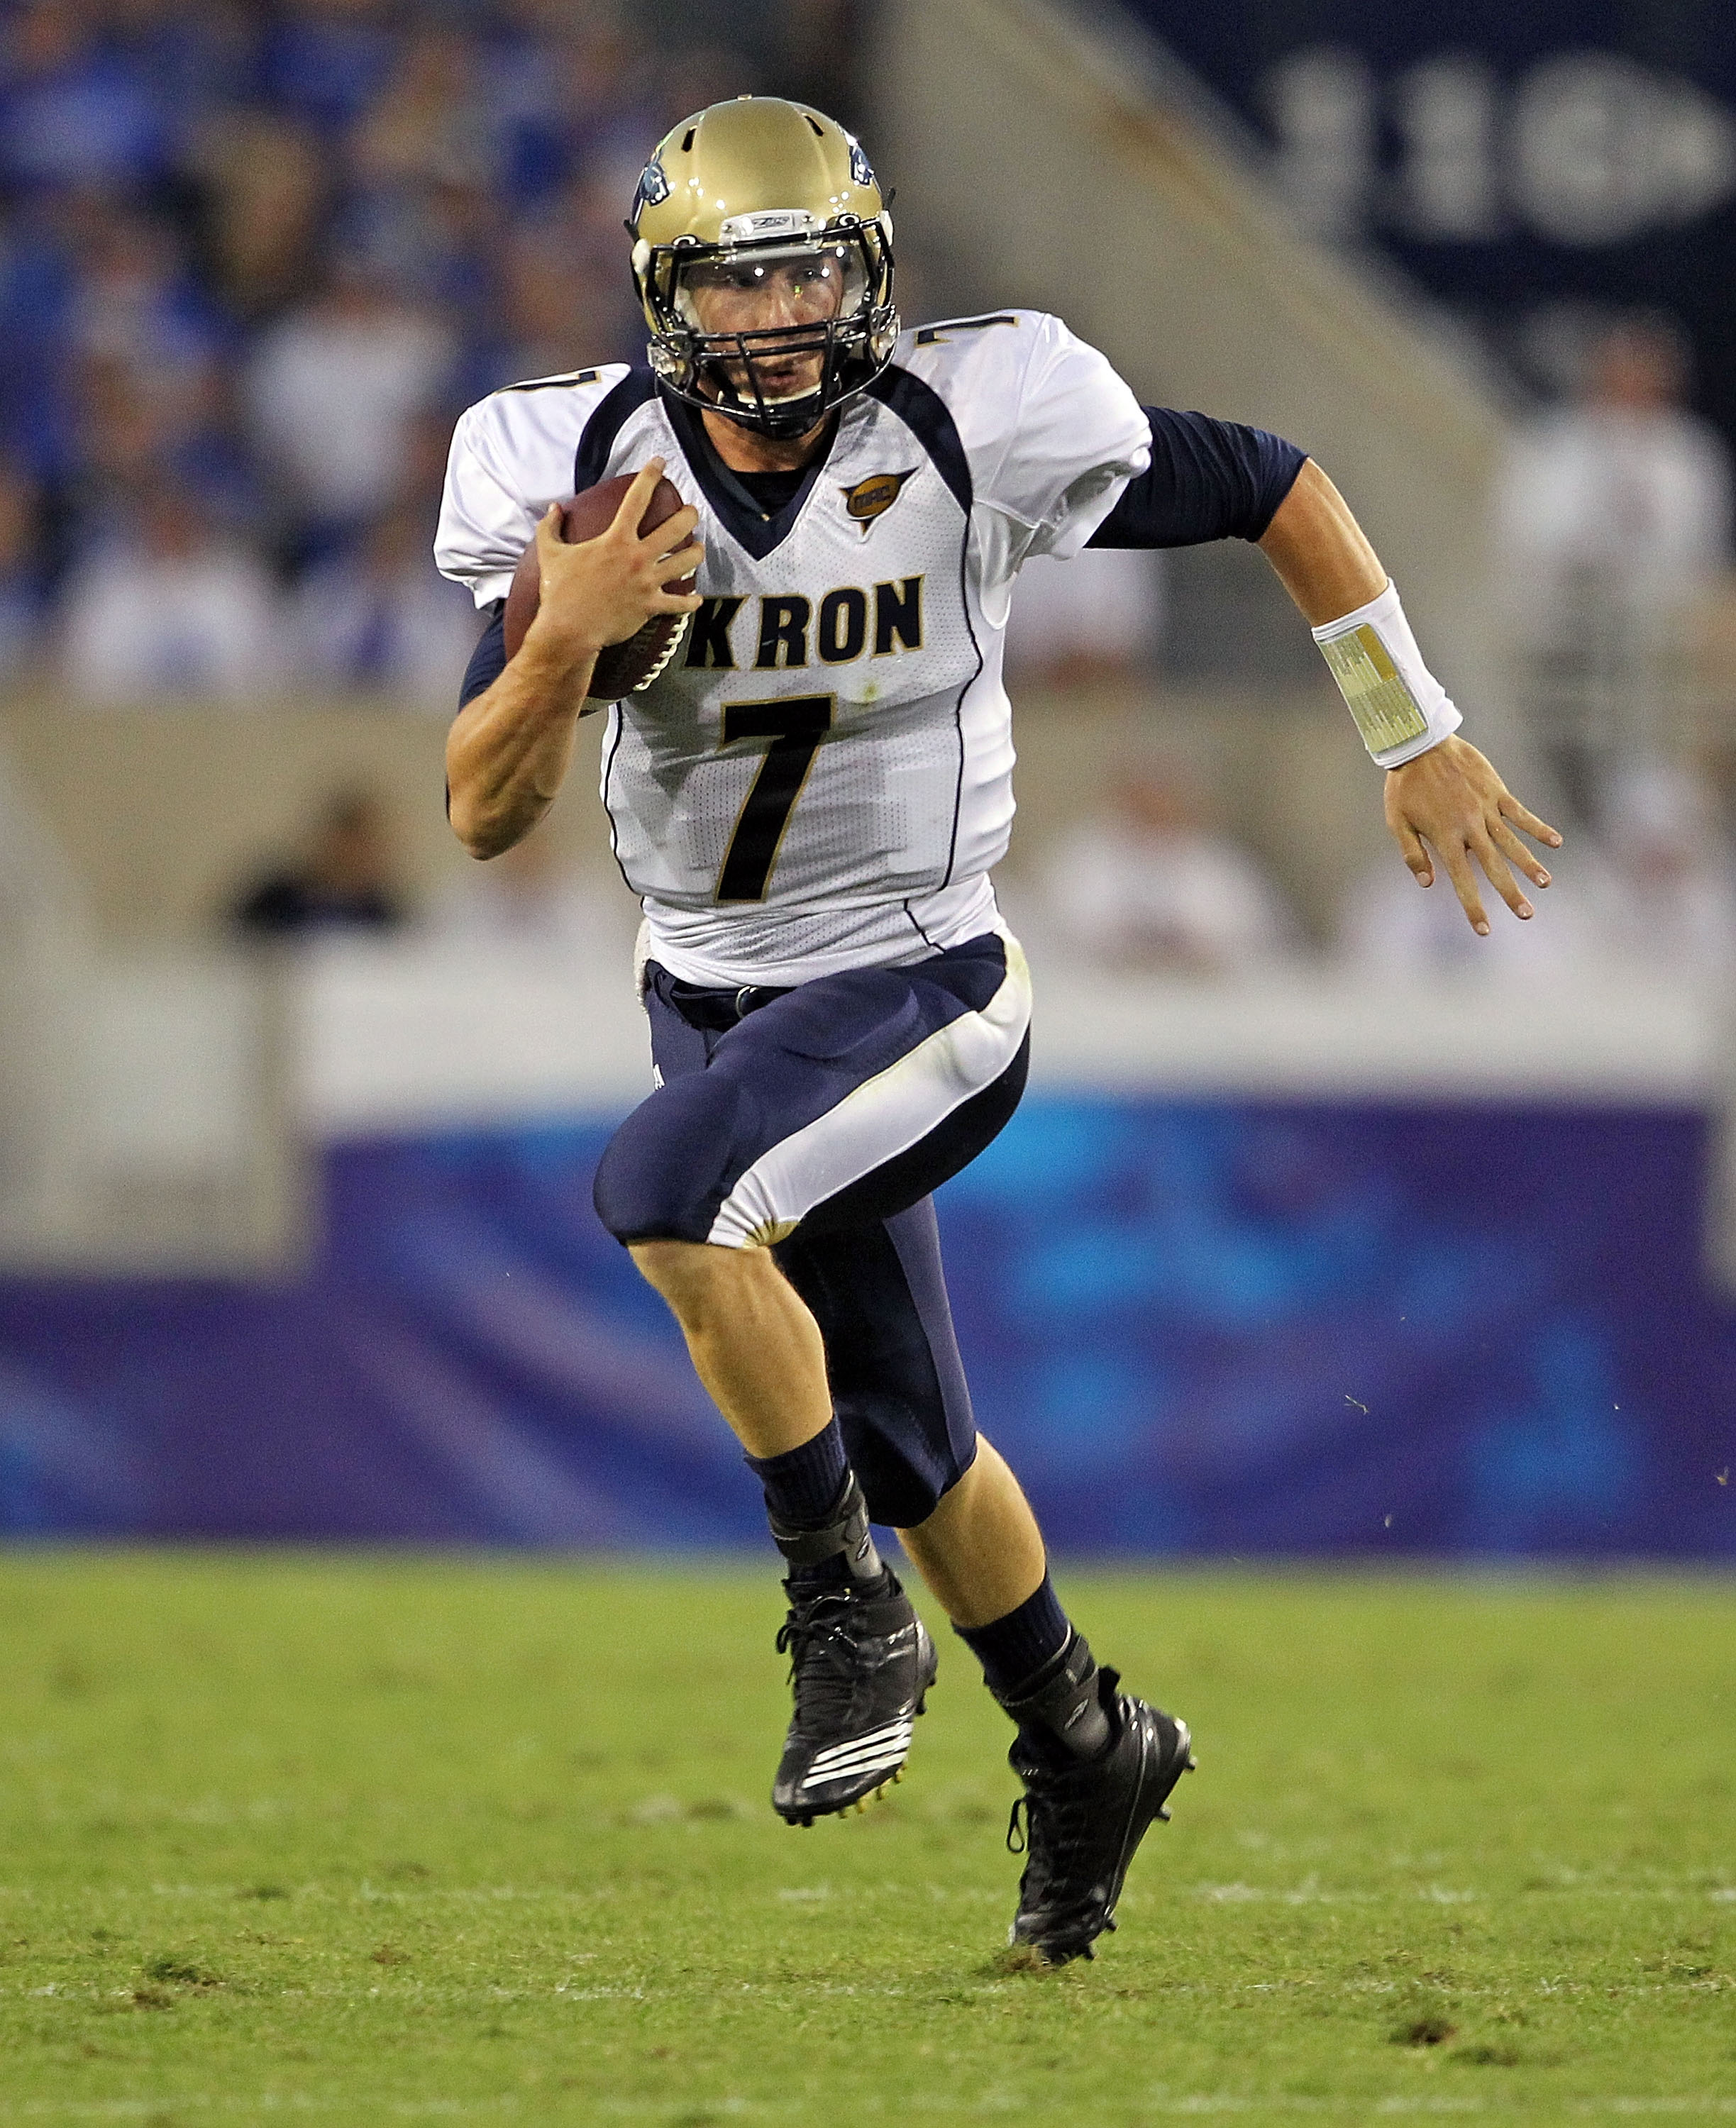 LEXINGTON, KY - SEPTEMBER 18:  Patrick Nicely #7 of the Akron Zips runs with the ball during the game against the Kentucky Wildcats at Commonwealth Stadium on September 18, 2010 in Lexington, Kentucky.  (Photo by Andy Lyons/Getty Images)